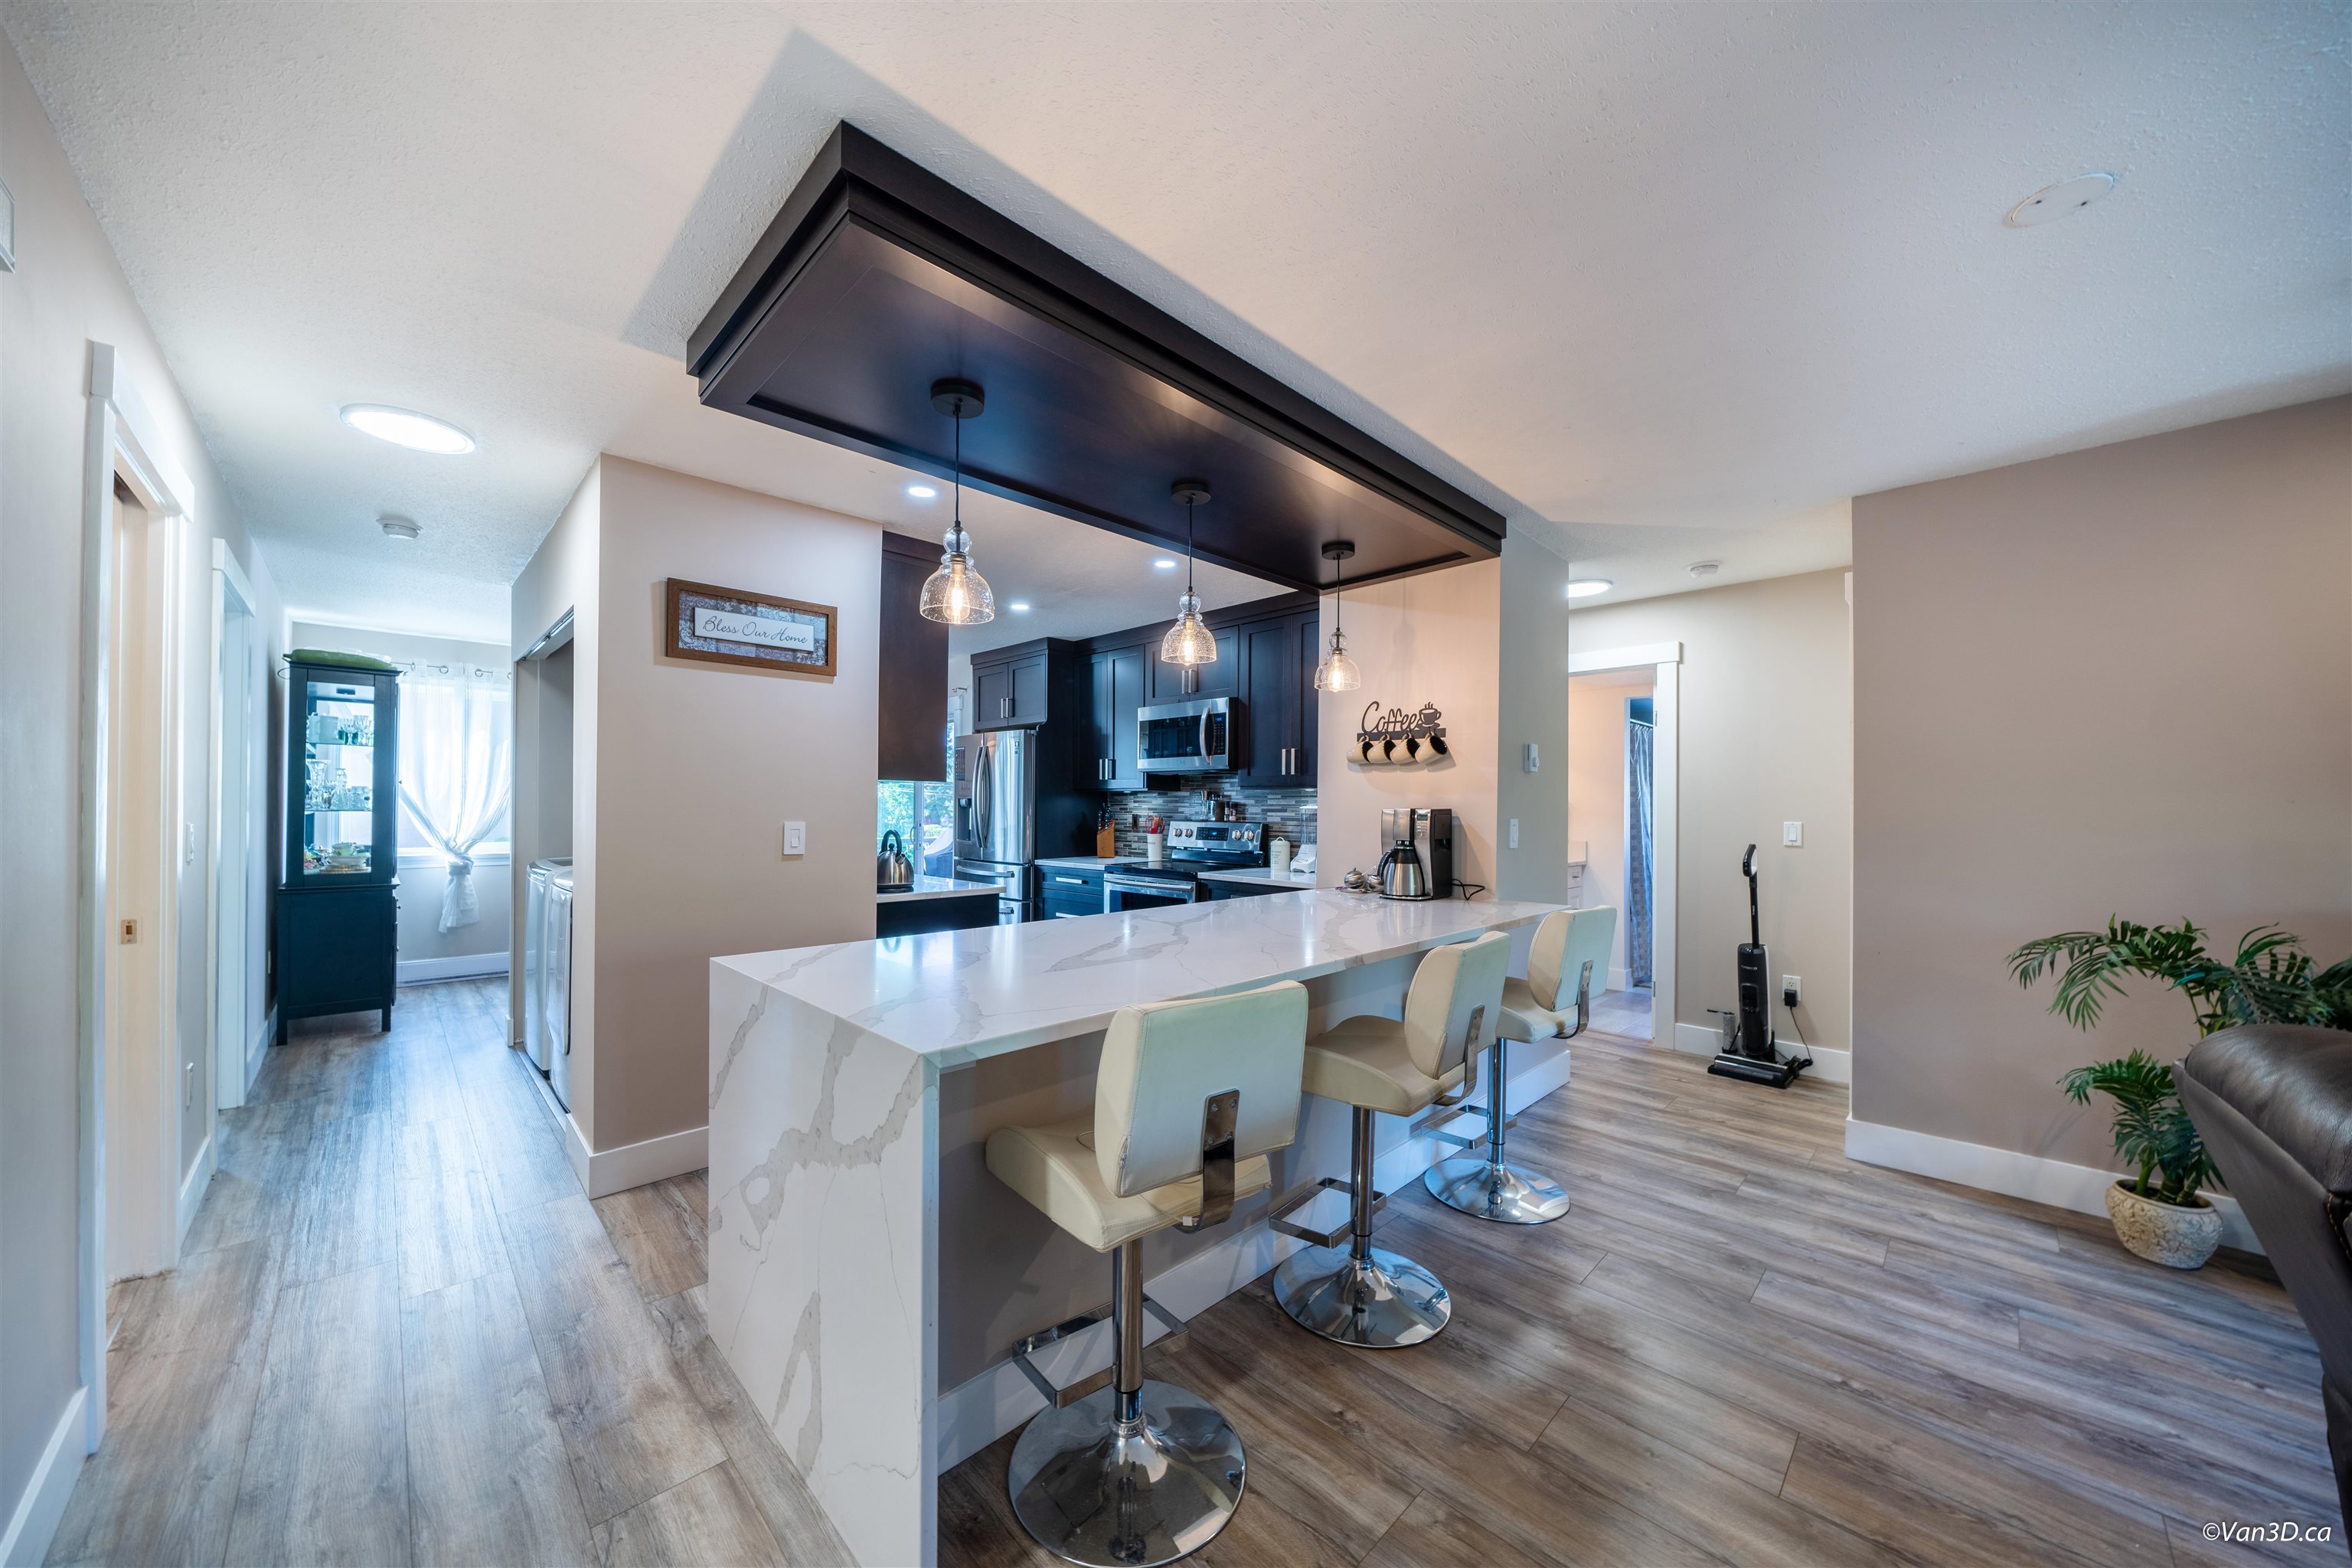 Langley City Townhouse for sale:  3 bedroom 1,396 sq.ft. (Listed 2106-02-06)